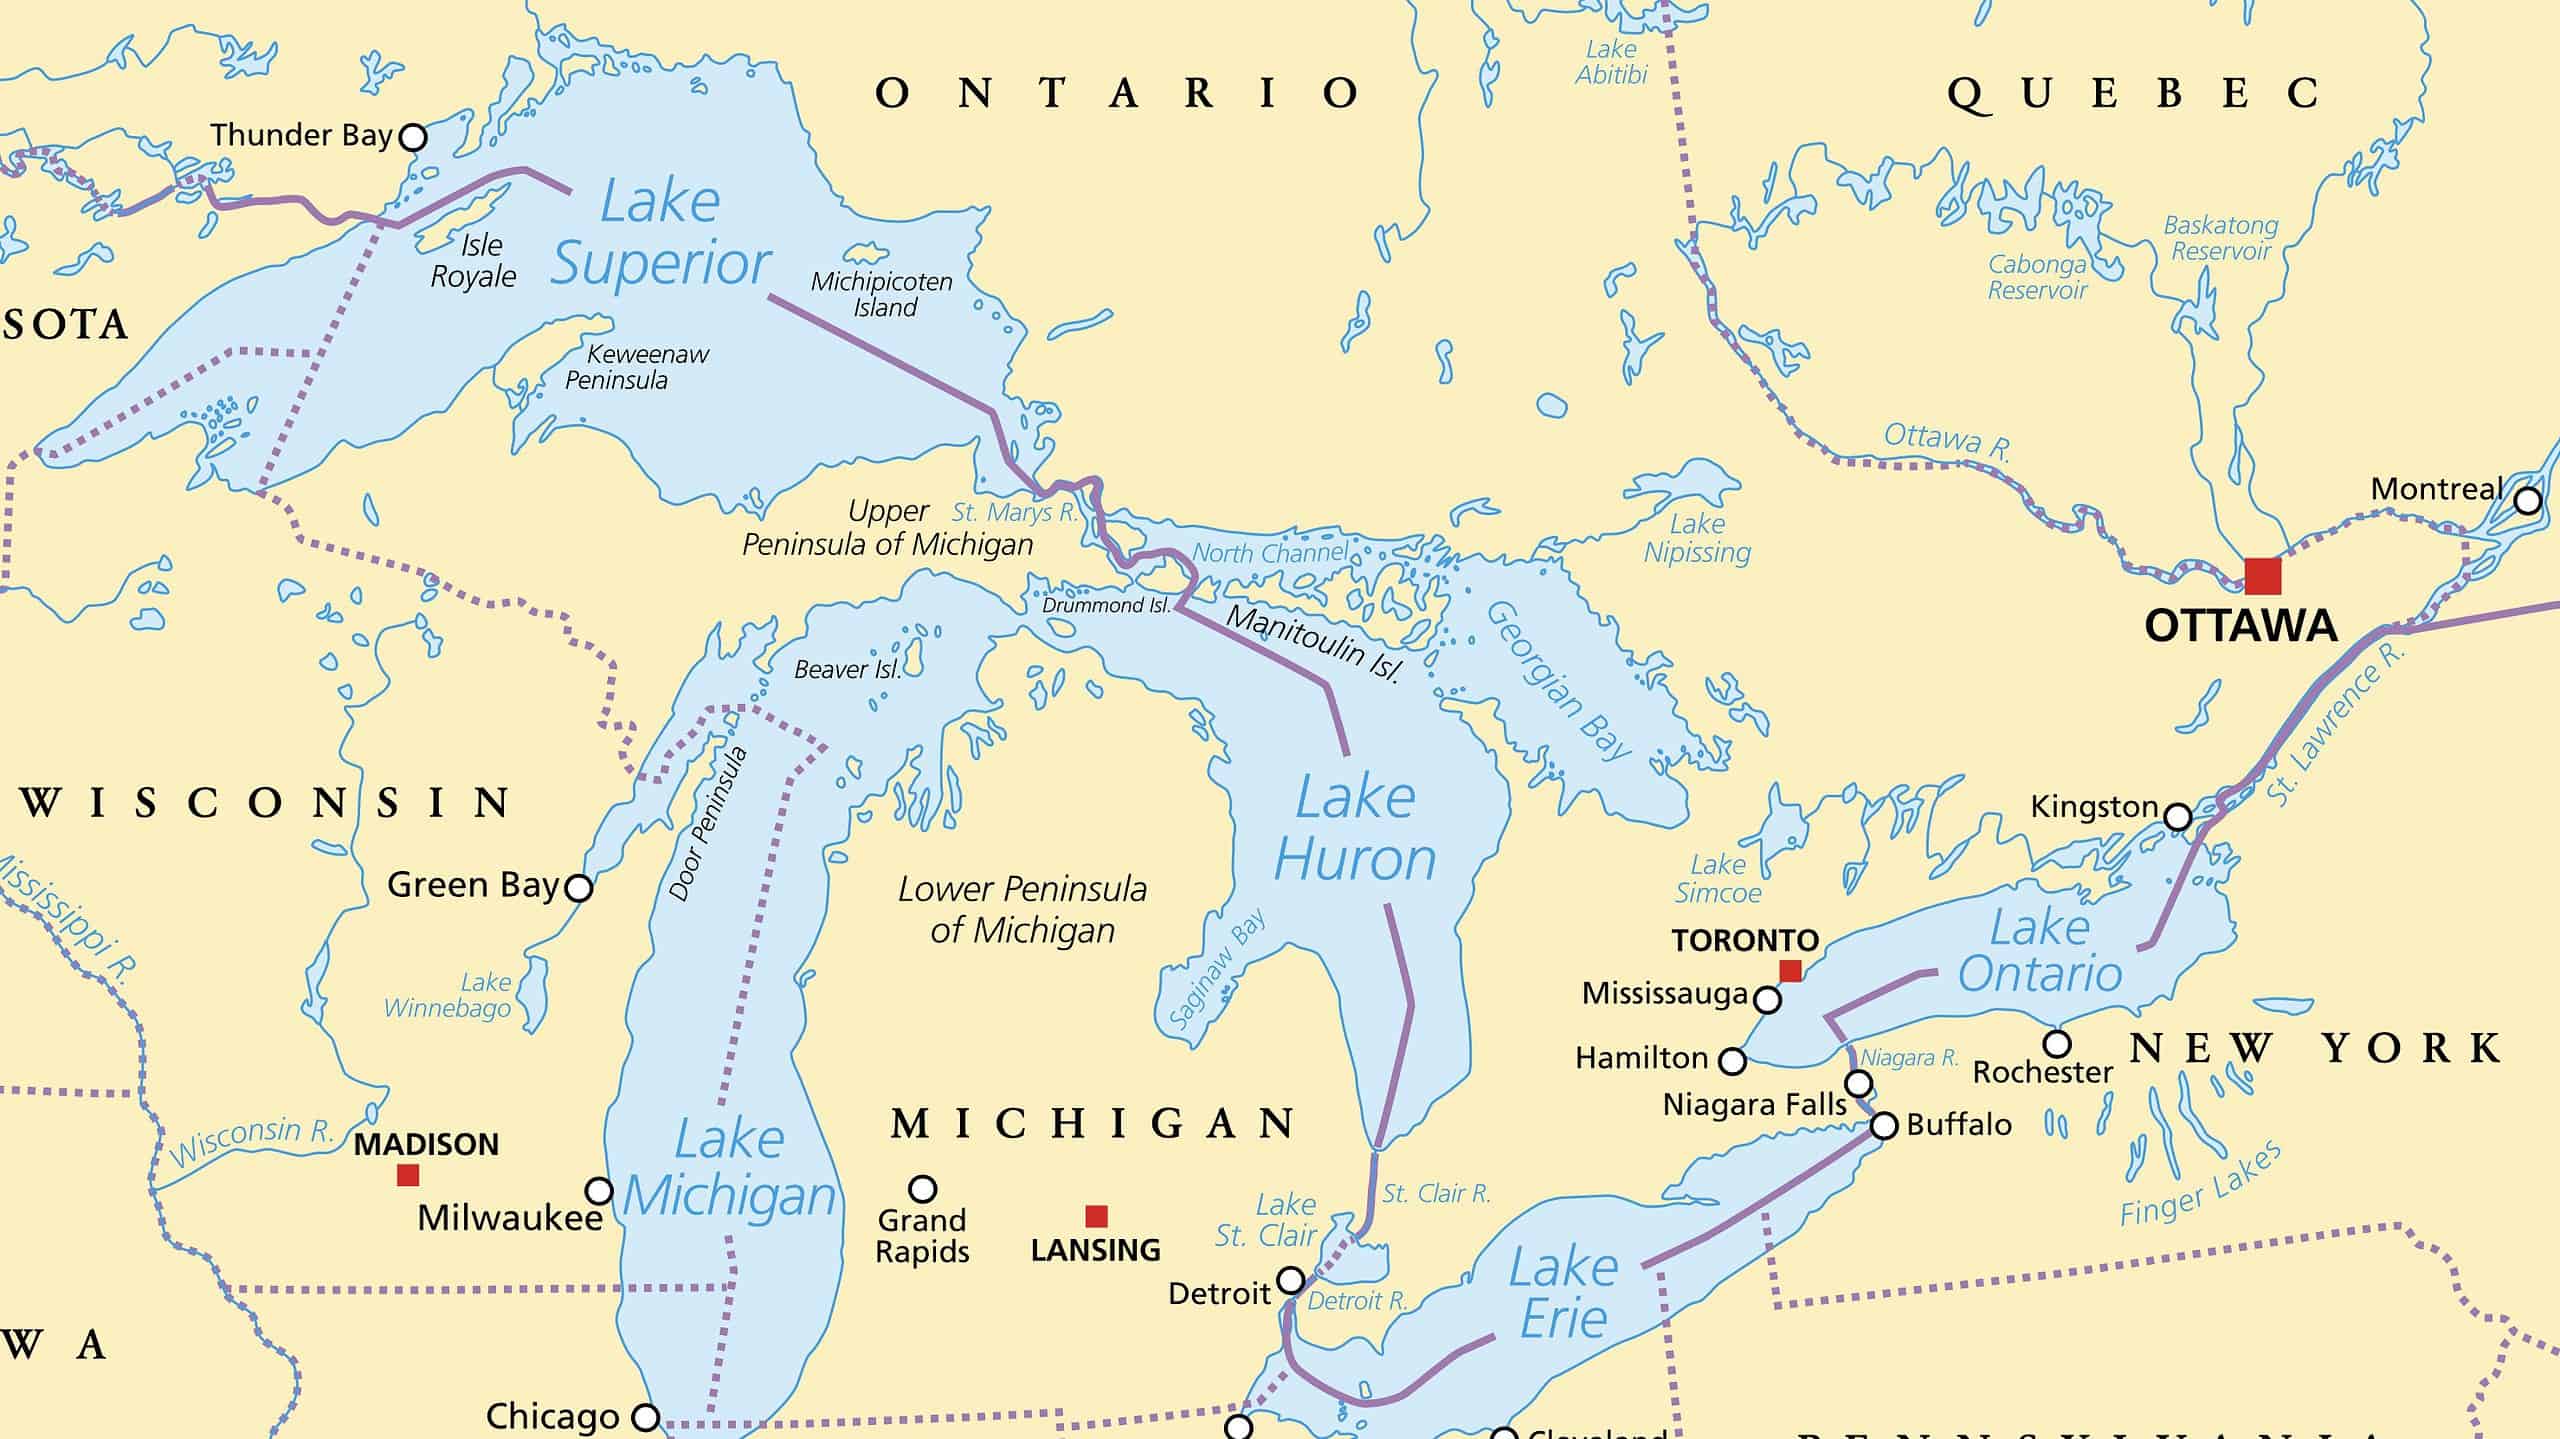 Great Lakes of North America political map. Lakes Superior, Michigan, Huron, Erie and Ontario. Series of large interconnected freshwater lakes on or near the border of Canada and of the United States.